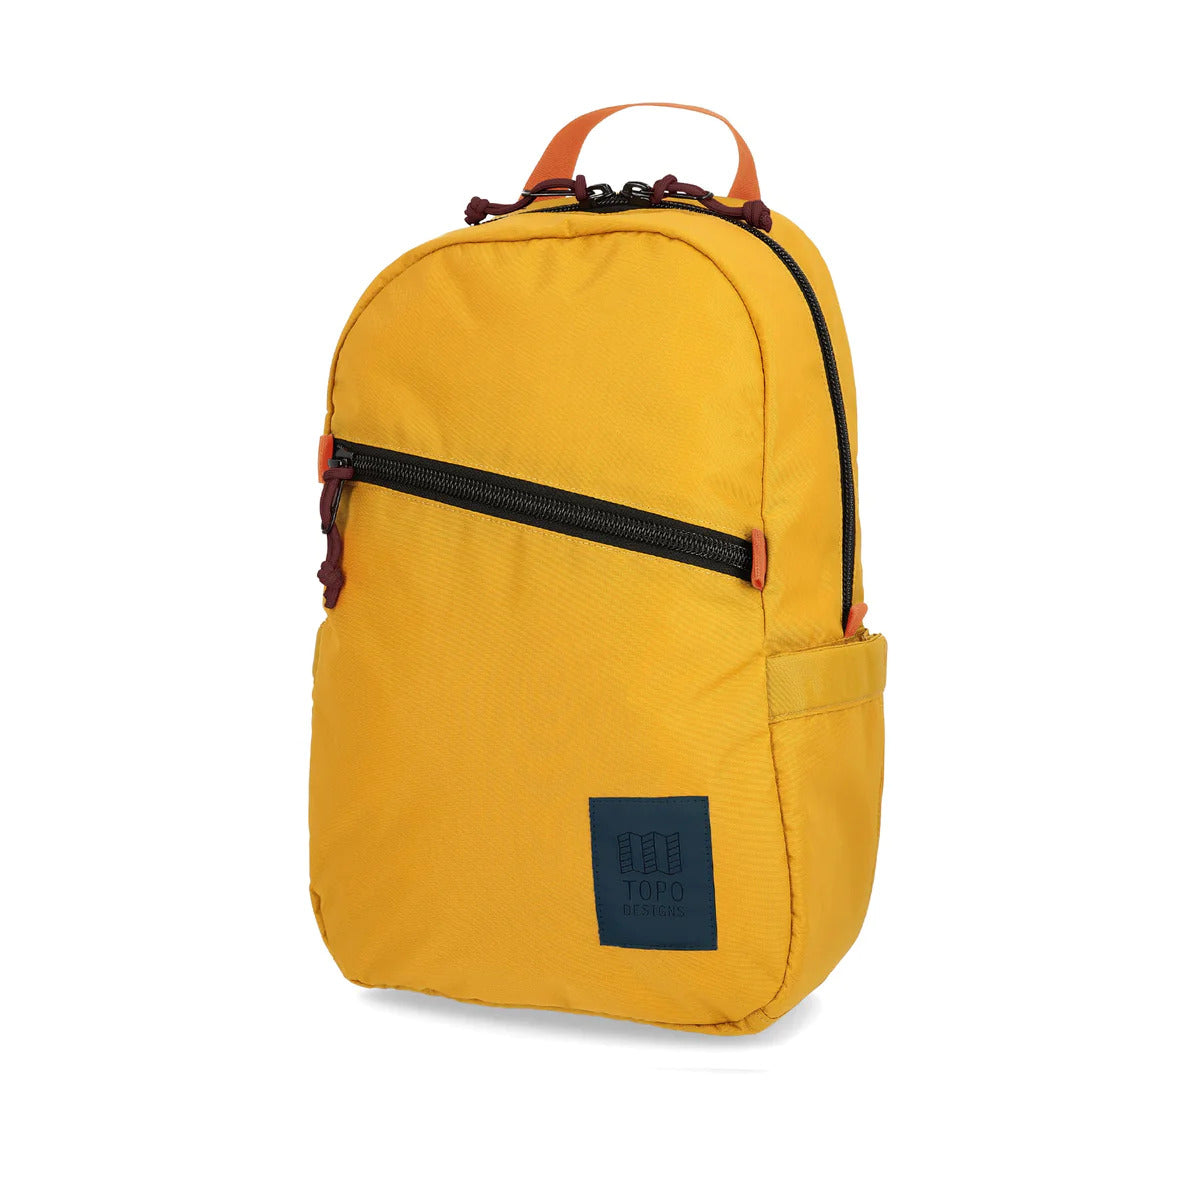 Topo Designs Light Pack in recycled "Mustard" nylon.